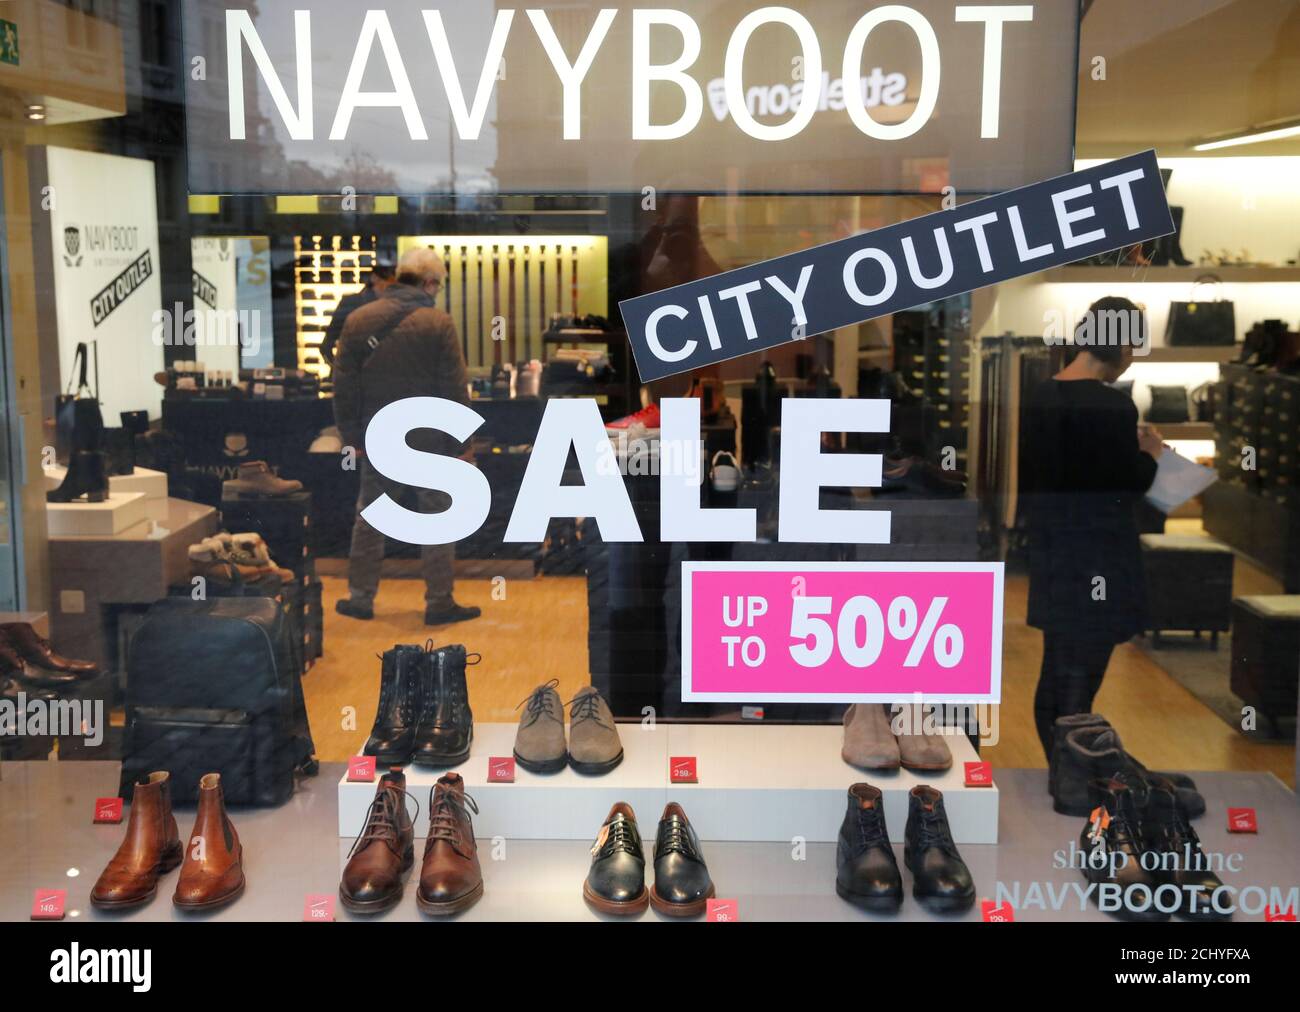 Navyboot High Resolution Stock Photography and Images - Alamy